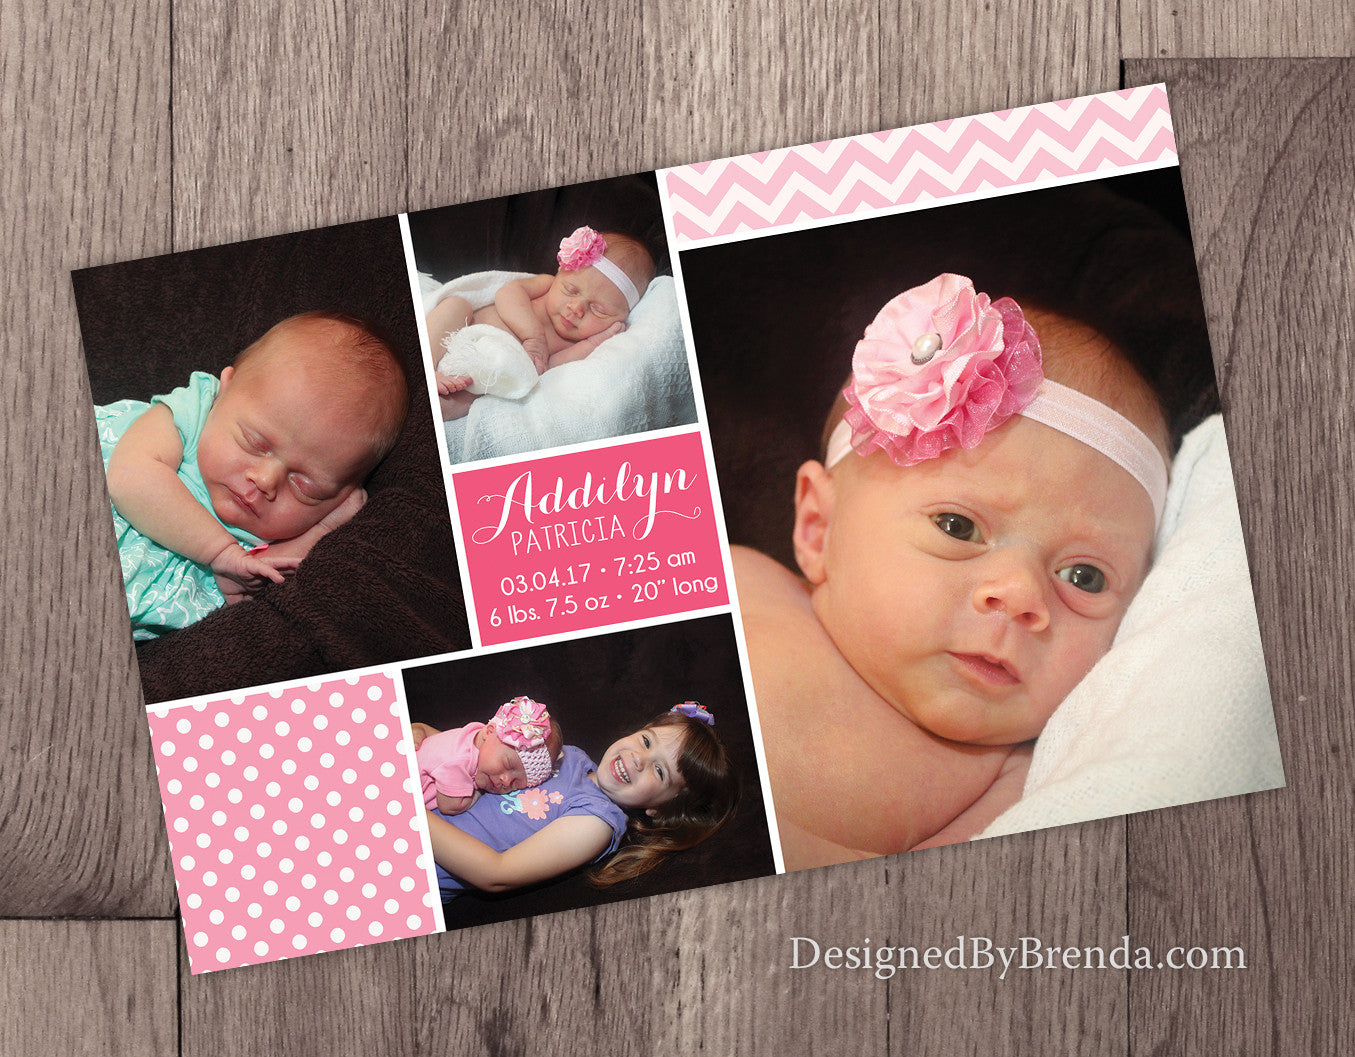 Baby Announcement Card with Custom Photo Collage - Pink Chevron & Polka Dots